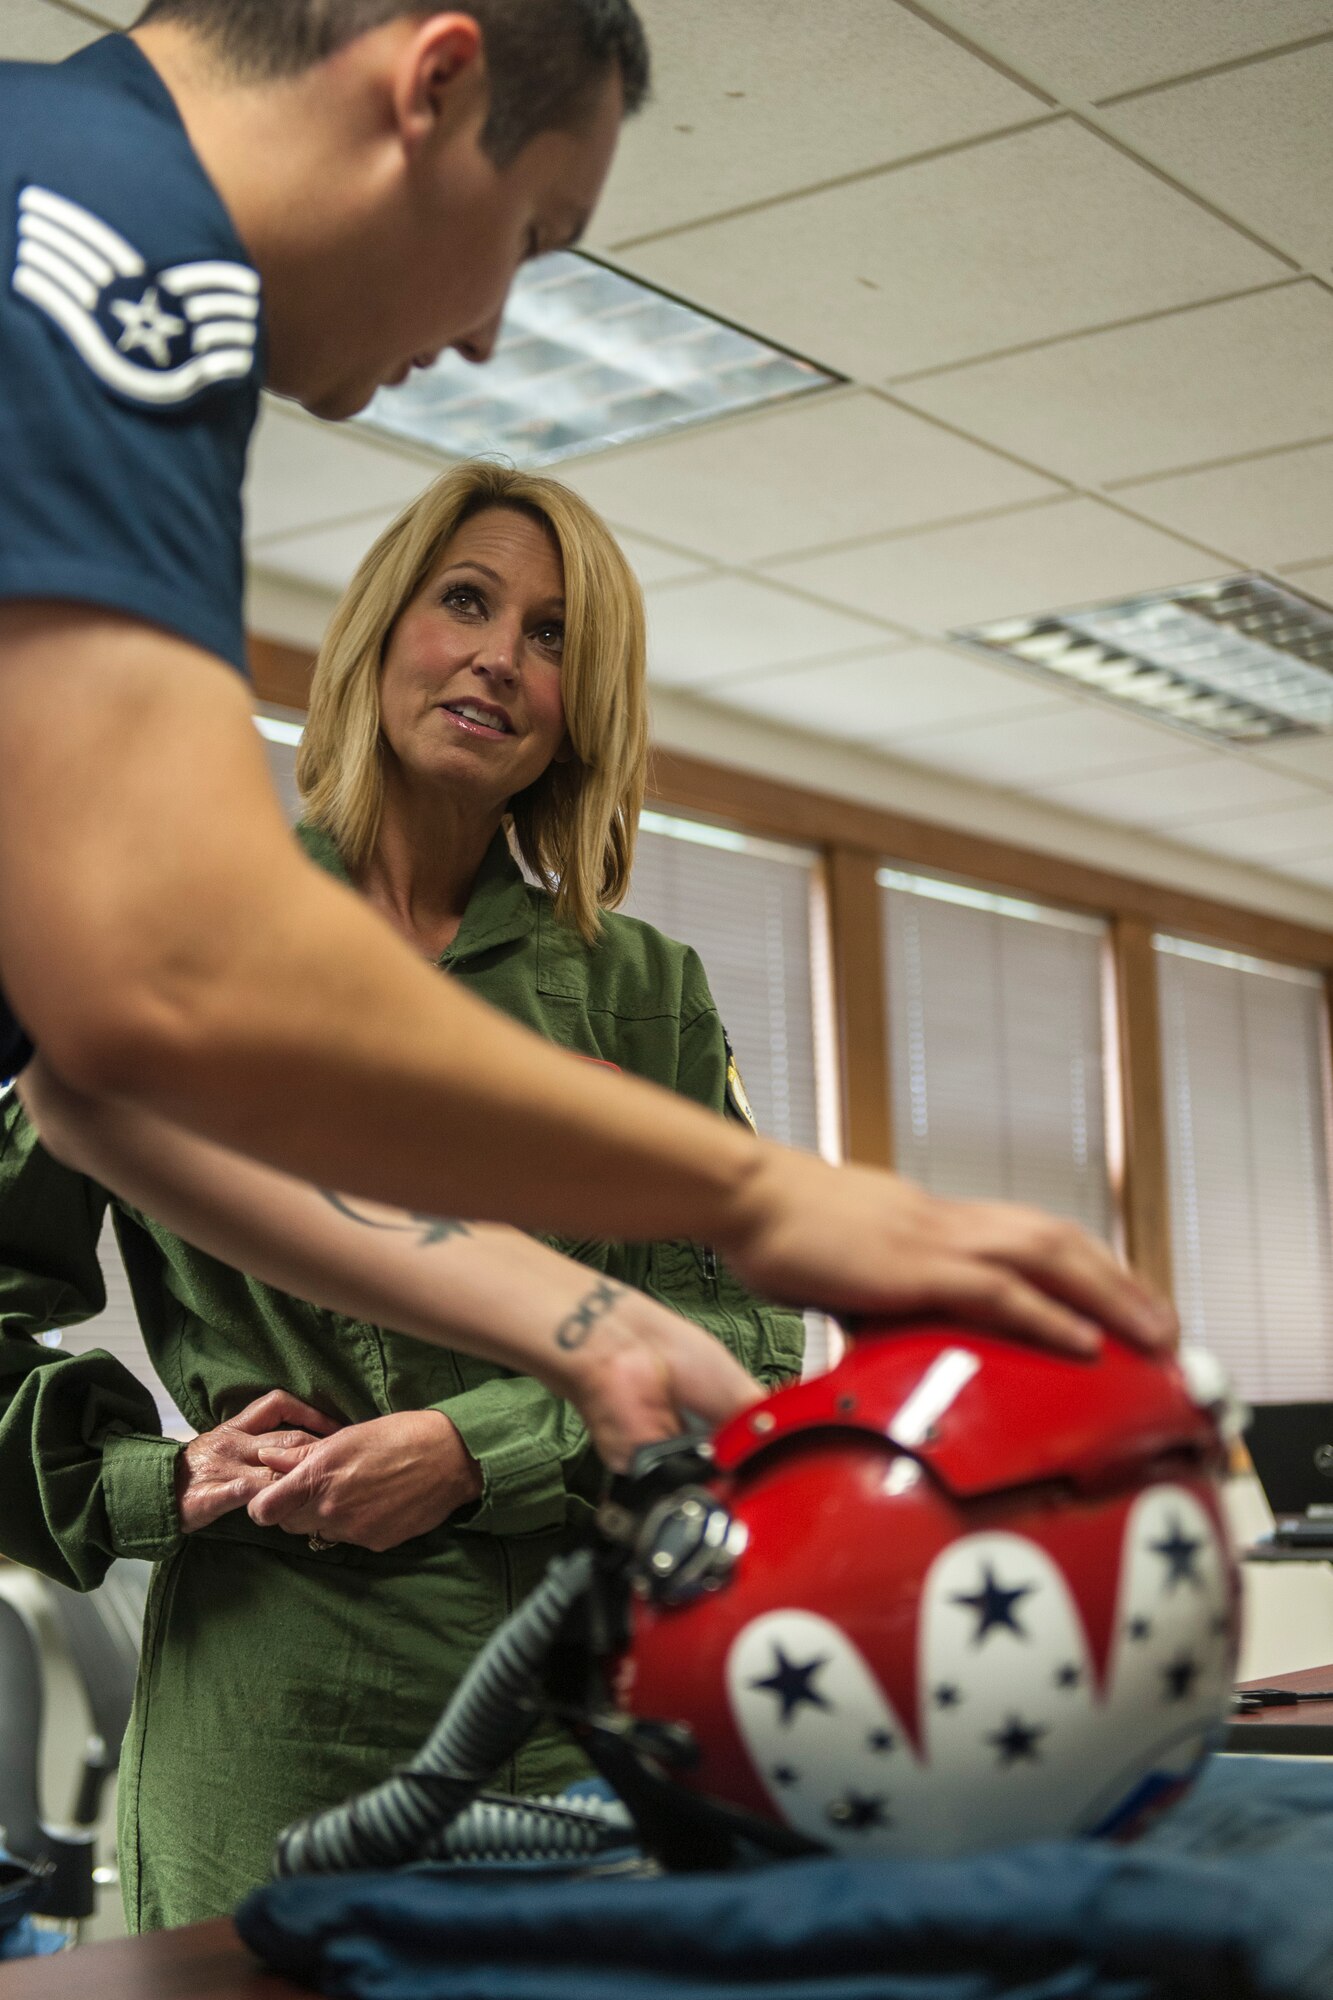 Staff Sgt. Jose Ibarra explains to Leslie Lowe how to use her helmet and mask in preparation for a U.S. Air Force Thunderbirds orientation flight as part of SkyFest 2014 at Fairchild Air Force Base, Wash., May 29, 2014. The Thunderbirds is an Air Combat Command unit composed of eight pilots, including six demonstration pilots, four support officers, three civilians and more than 130 enlisted personnel performing in 25 career fields. SkyFest is Fairchild’s air show and open house, giving the local and regional community the opportunity to view Airmen and our resources. Ibarra is a Thunderbirds aircrew flight equipment specialist here from Nellis AFB, Nev., and Lowe is a KHQ 6 reporter. (U.S. Air Force photo by Staff Sgt. Benjamin W. Stratton/Released)